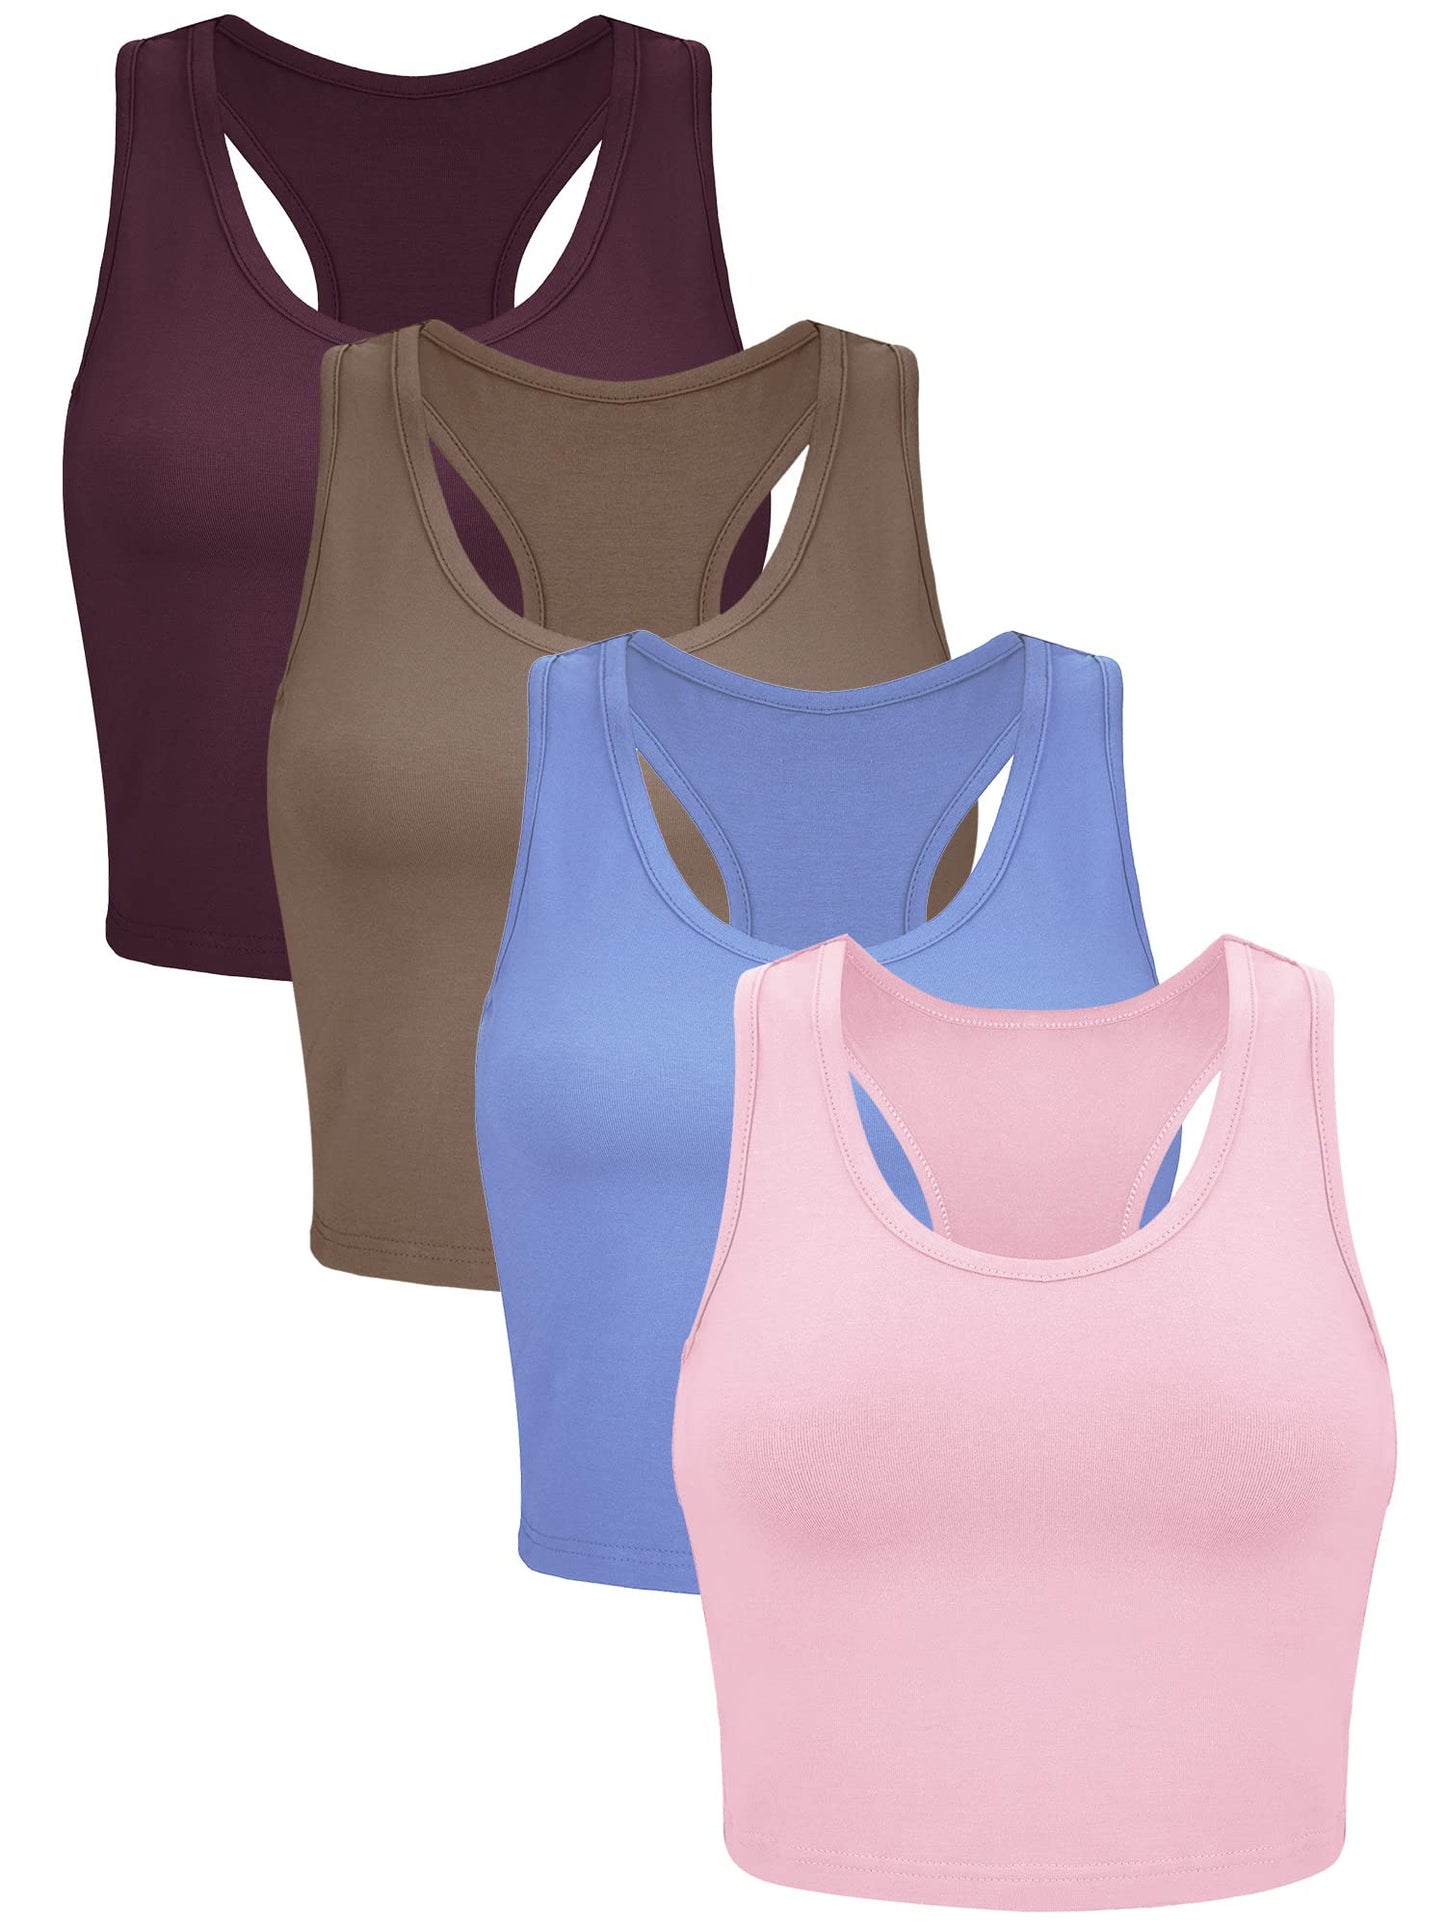 4 Pieces Basic Crop Tank Tops Sleeveless Racerback Crop Sport Top for Women (Leather Pink, Coffee, Serenity, Dark Red,Small)